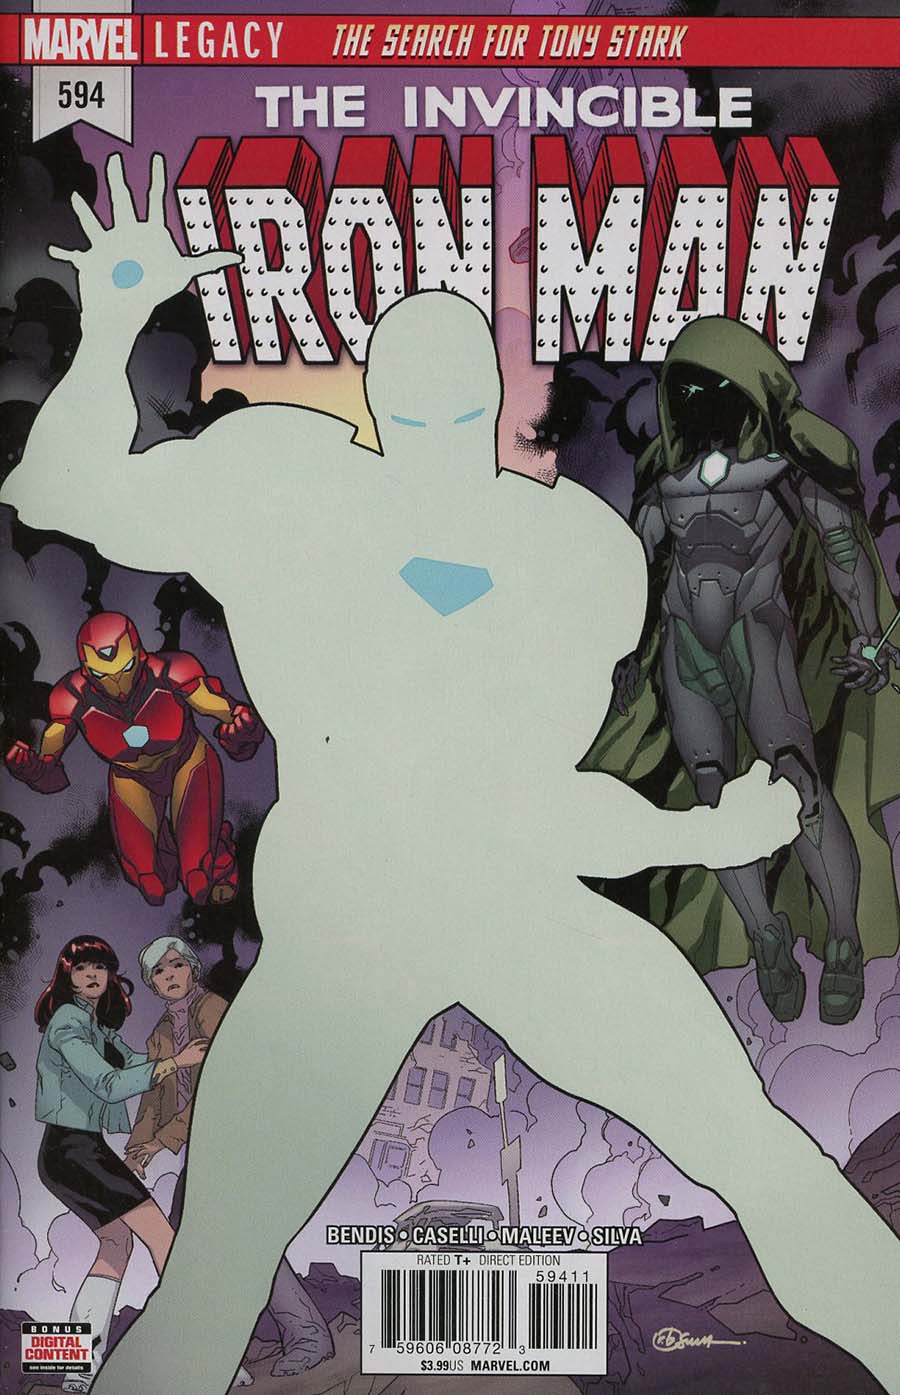 Invincible Iron Man Vol 3 #594 Cover A 1st Ptg (Marvel Legacy Tie-In)